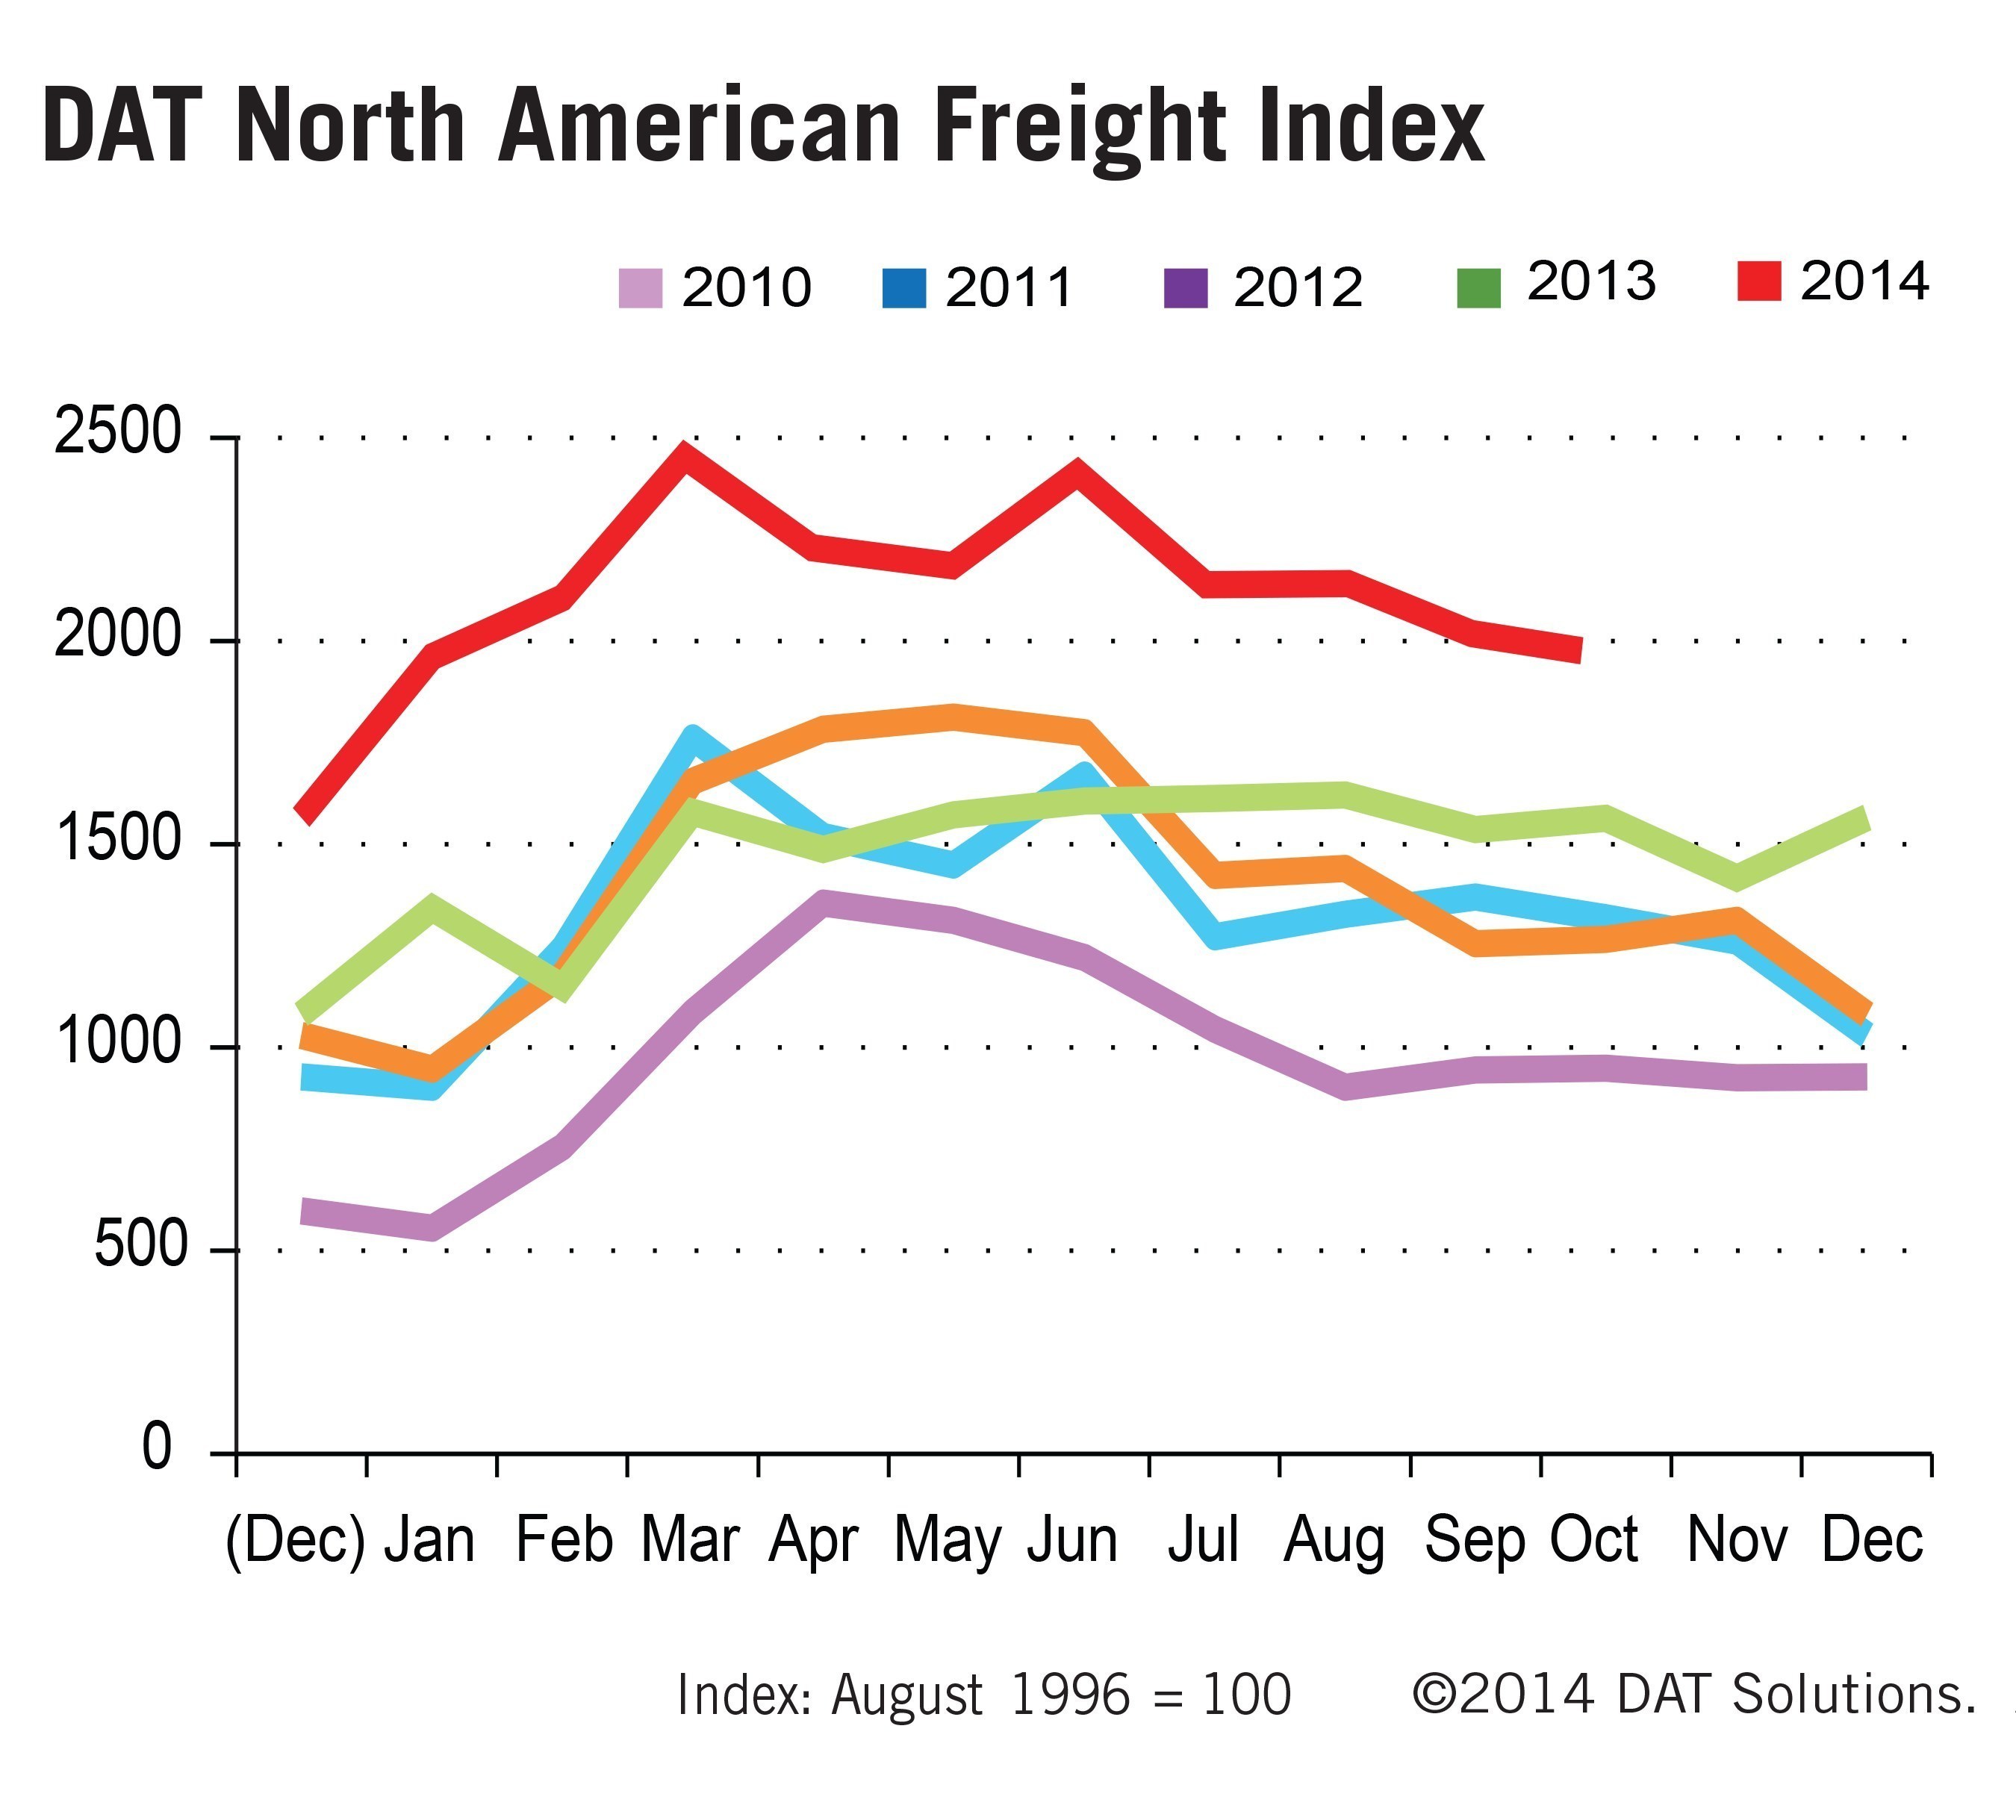 5-year truck load freight volume trends reported by the DAT North American Freight Index.